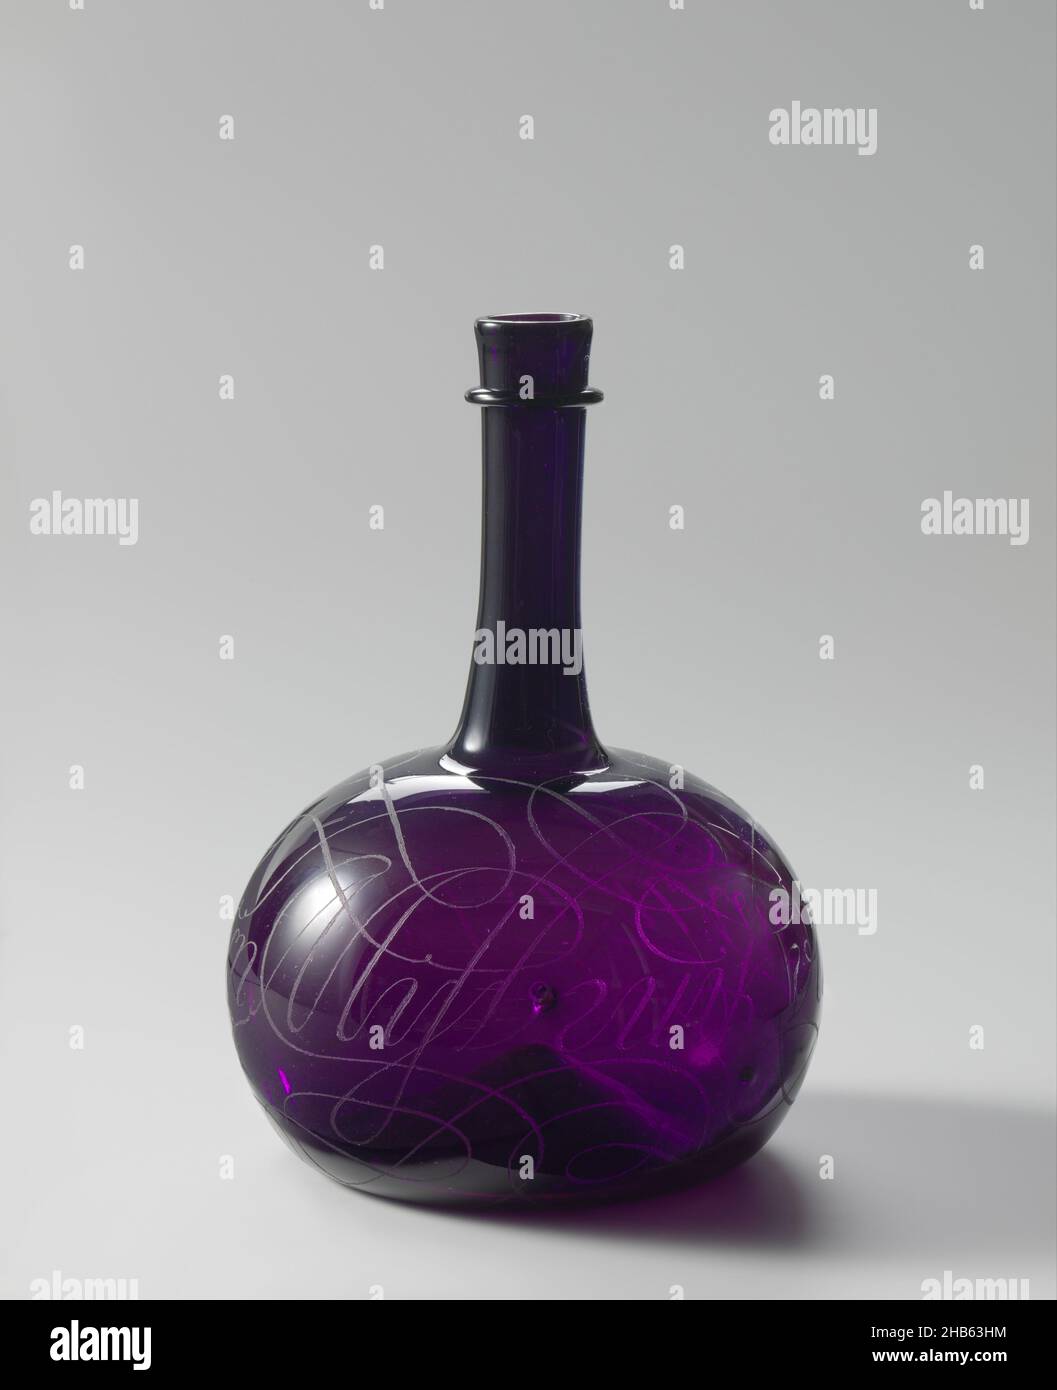 Bottle, Bottle inscribed, Abuse of wyn.is Soul phenine, Bottle of purple glass with soul inserted. Spherical body, transitioning to a slender neck, which has a ring at the top. On the body is calligraphed in Italian script 'Abuse of wyn.is Soul-phen.' On the bottom around the pontil mark 'Willem Van Heemskerk.AE 73 3 Ao 1686'. 4, glassblower: anonymous, Willem Jacobszoon van Heemskerk, glassblower: Low Countries, Leiden, 1686, glass, glassblowing, height 20.5 cm × diameter 14.5 cm, diameter 9.5 cm Stock Photo